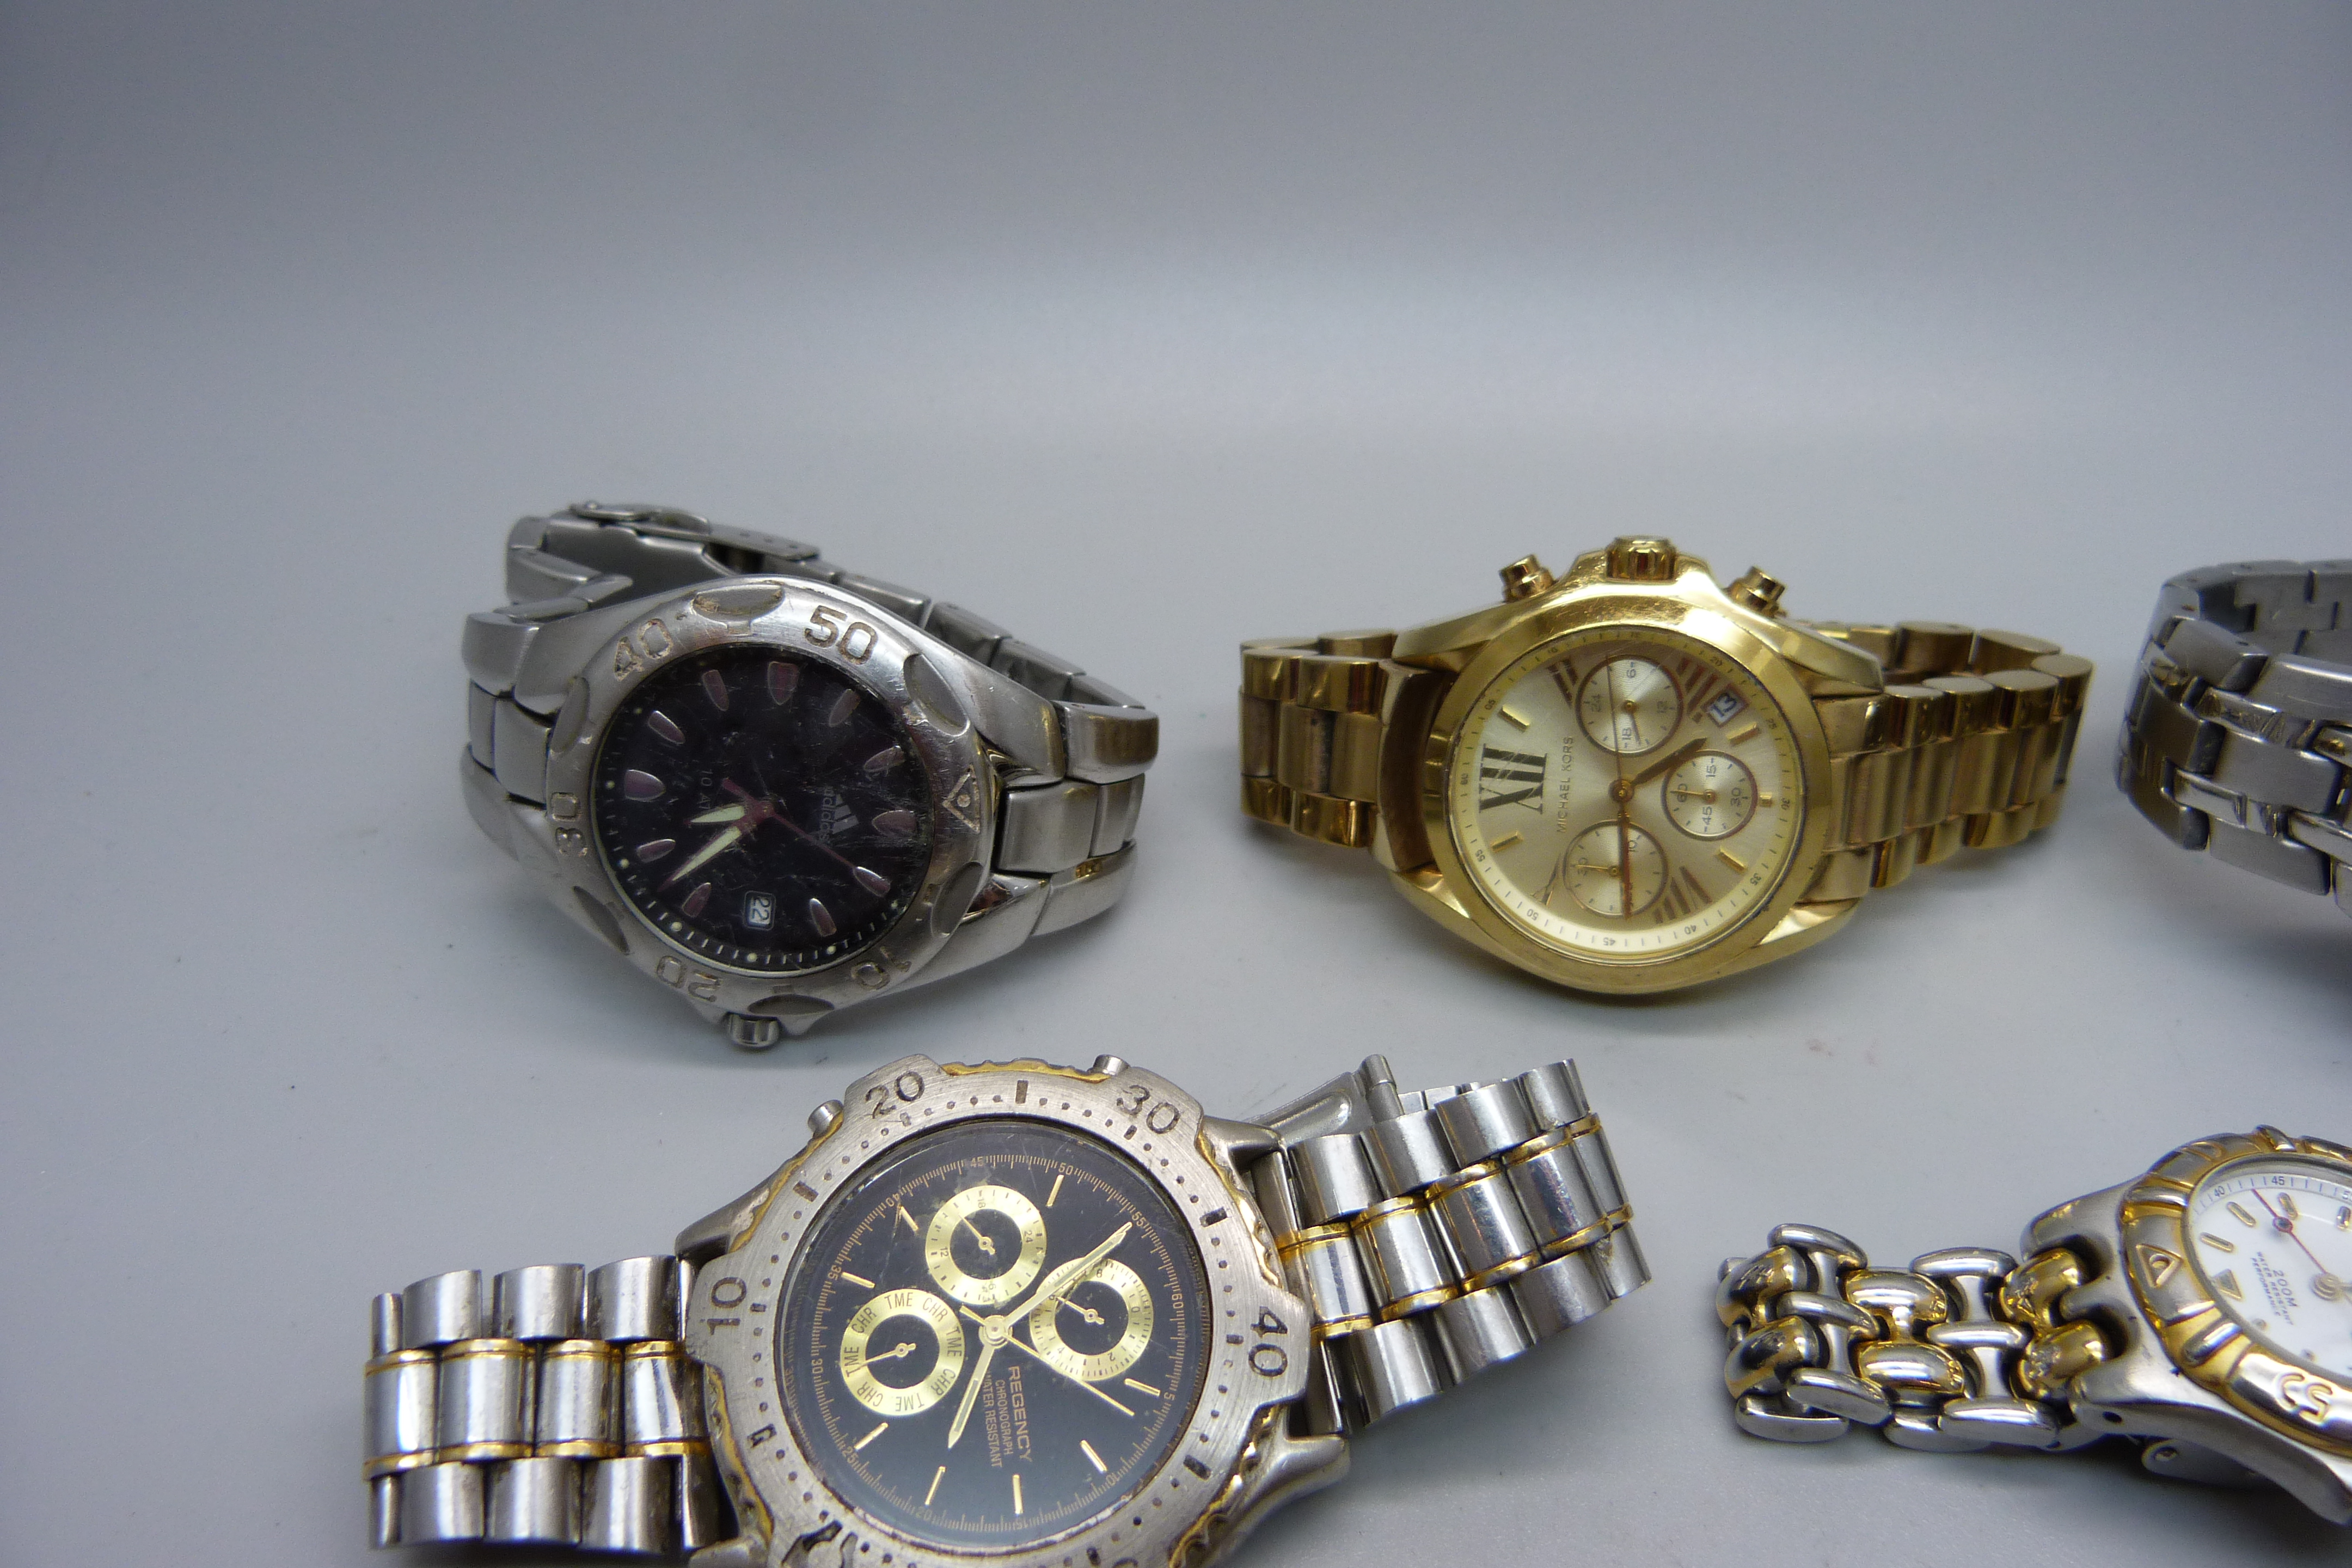 Six wristwatches including Ellese 200m diver's watch, Michael Kors, Avia Mariner, Pod Chronograph, - Image 2 of 3